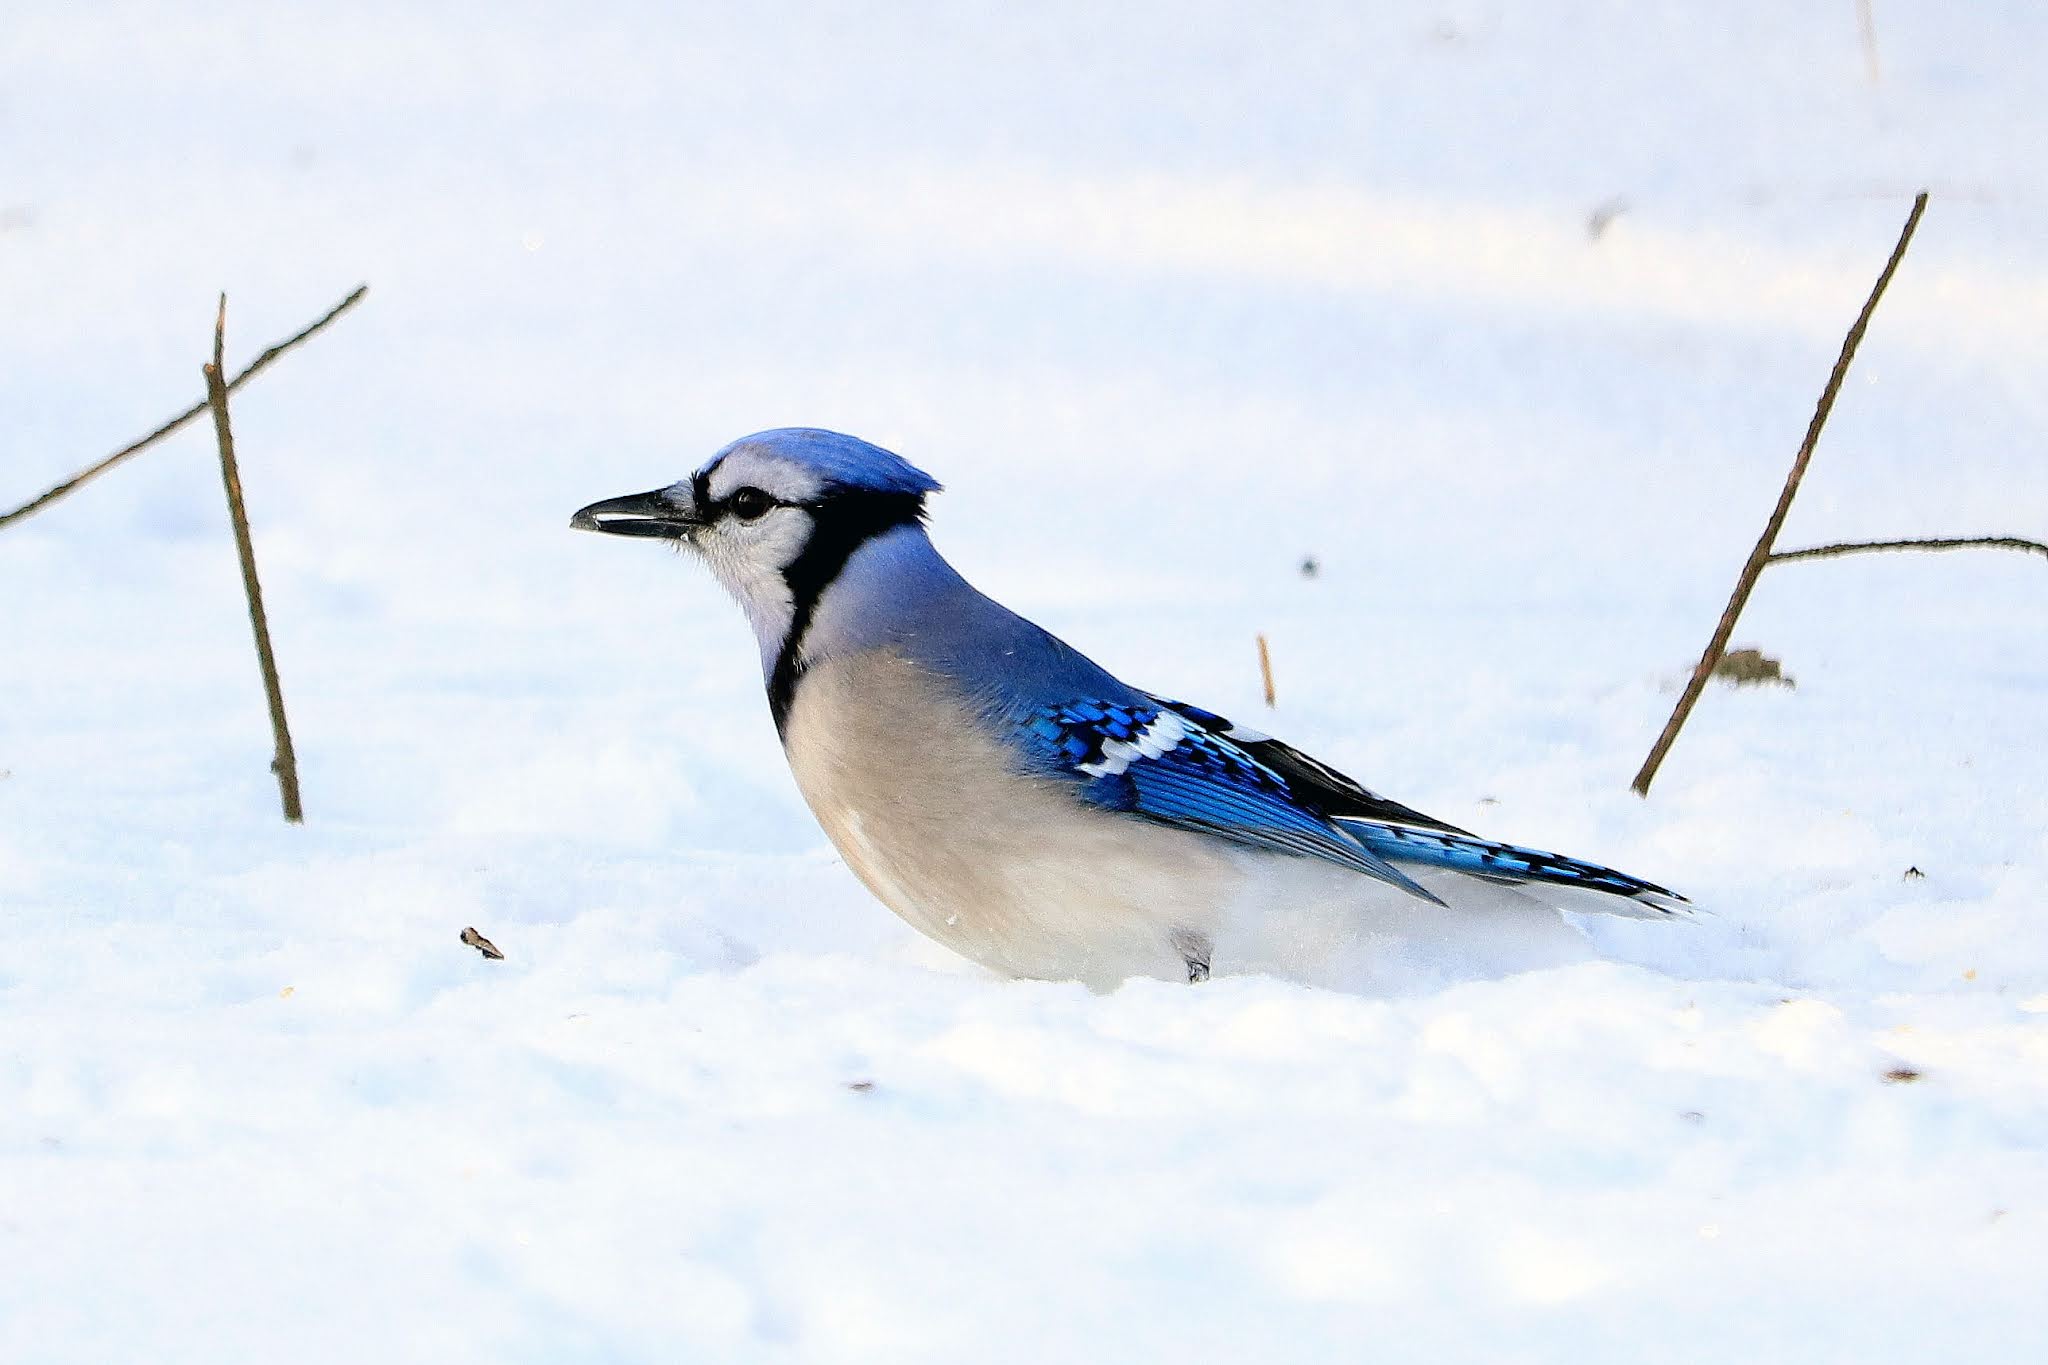 The Blue Jay: The Bird With Intense Blue Feathers